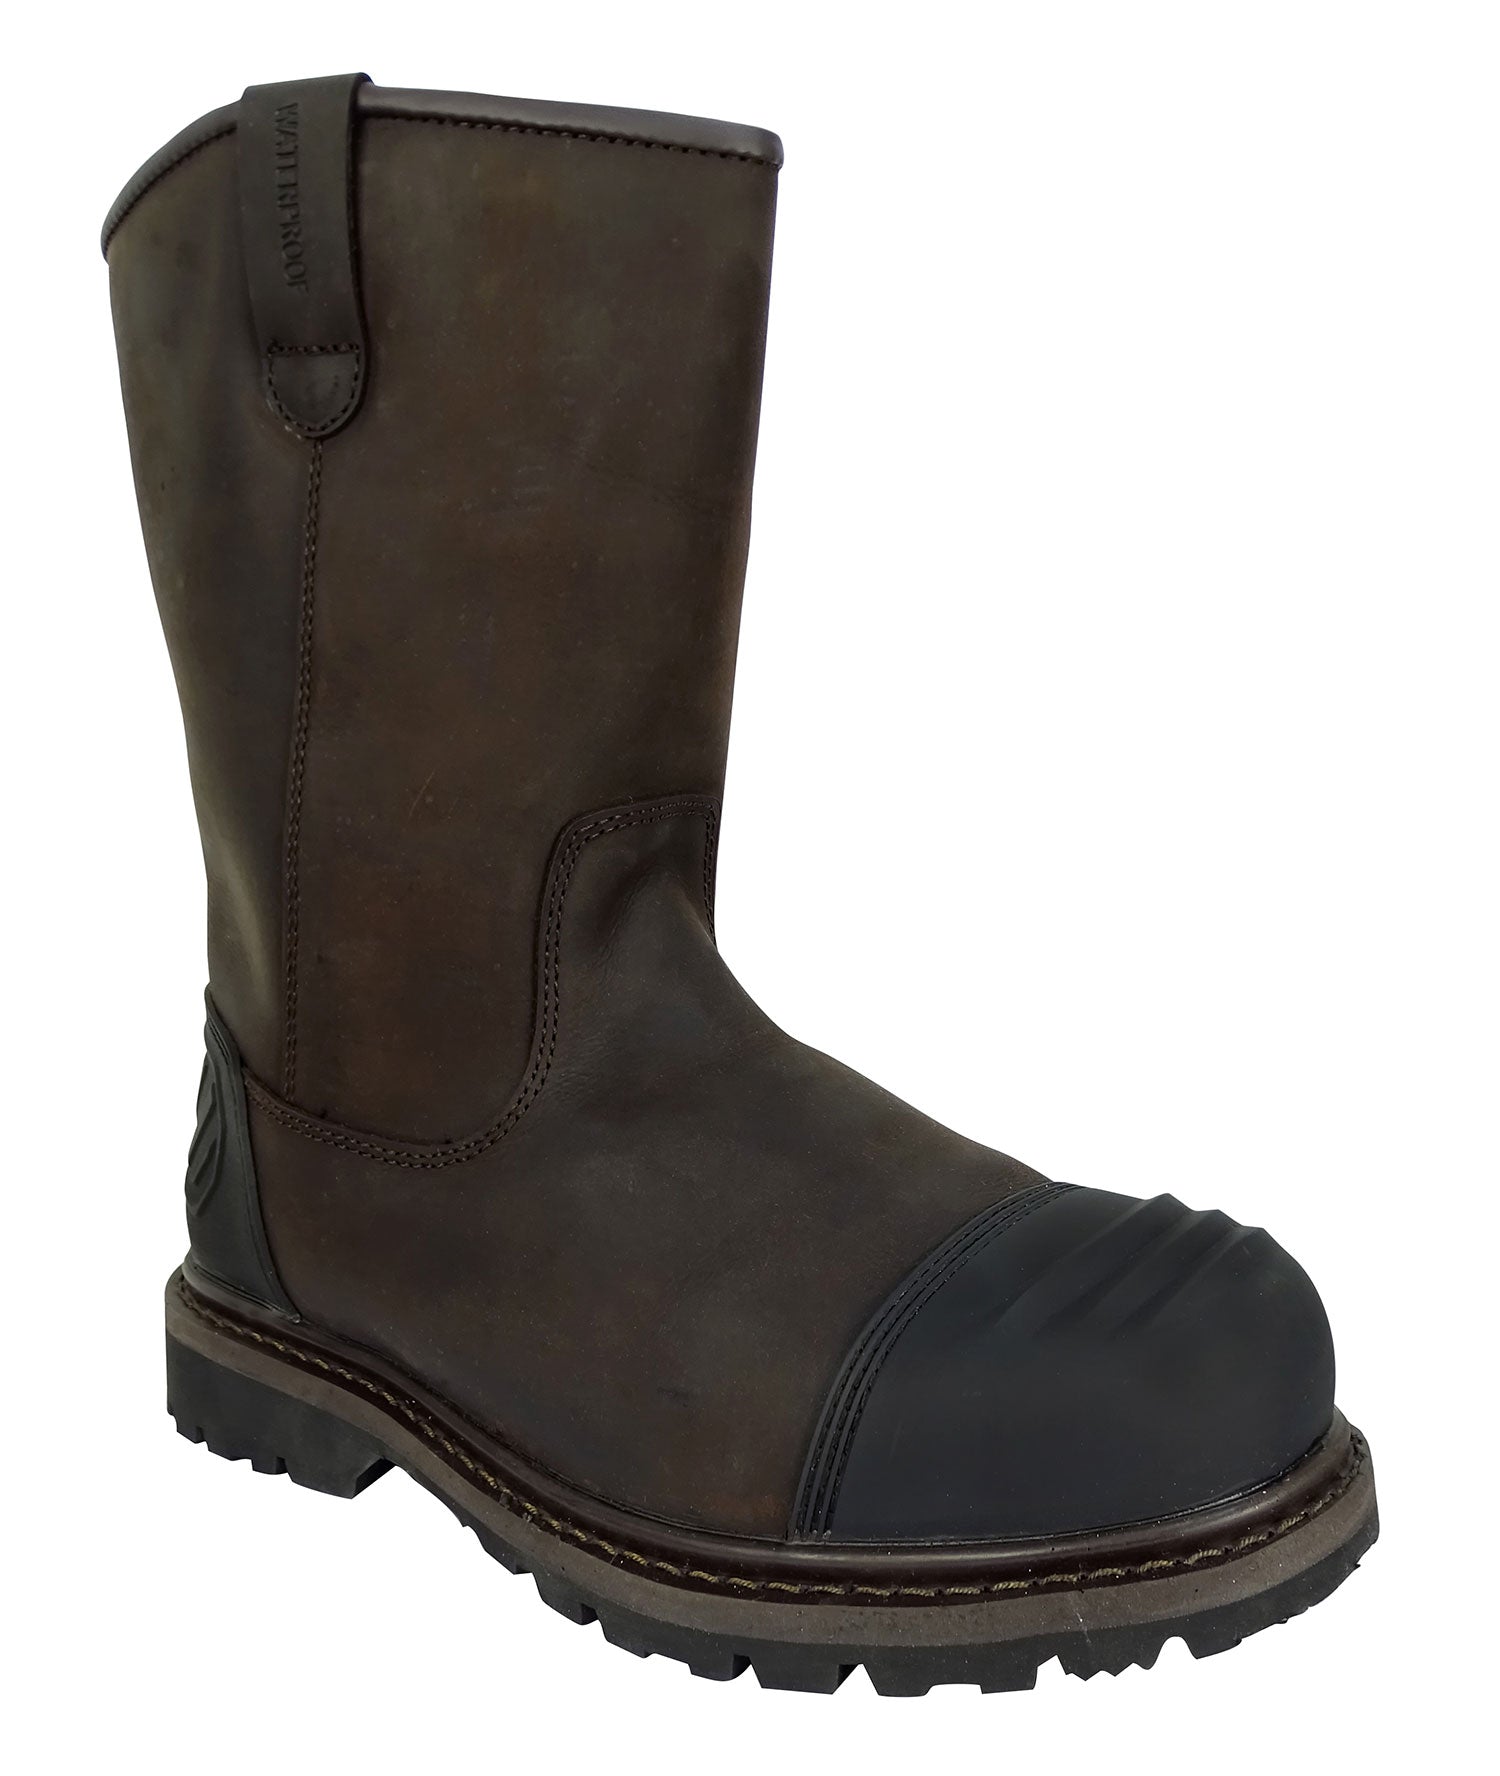 Steel toe Safety Hoggs of Fife Thor Safety Rigger Boots